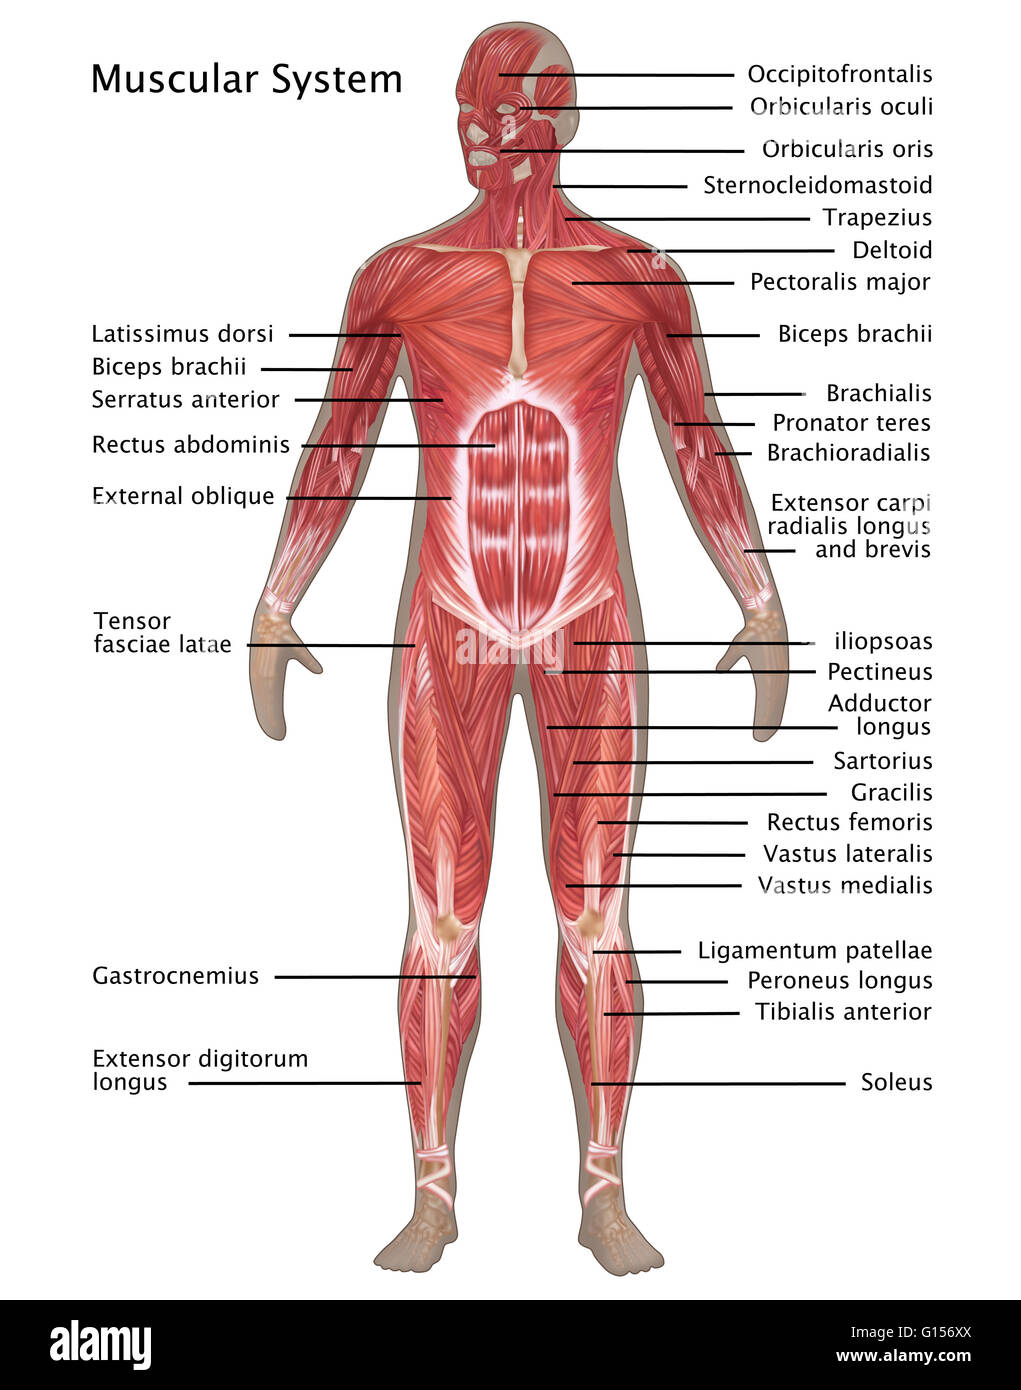 Illustration Of The Muscular System In The Male Anatomy Labeled From Stock Photo Royalty Free